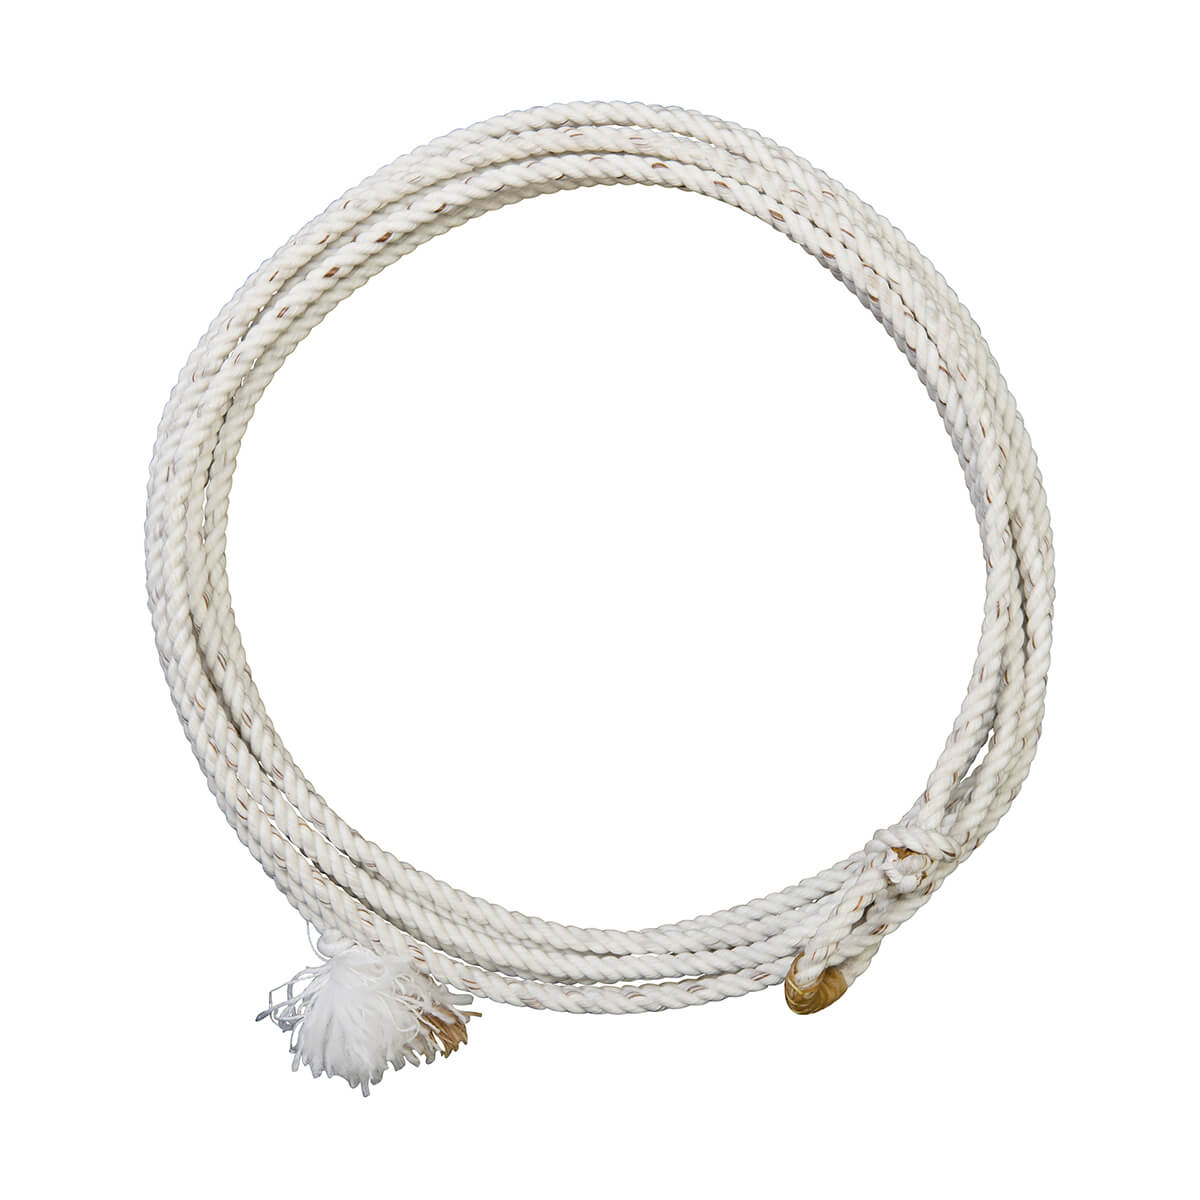 Ranch Rope - 30-ft